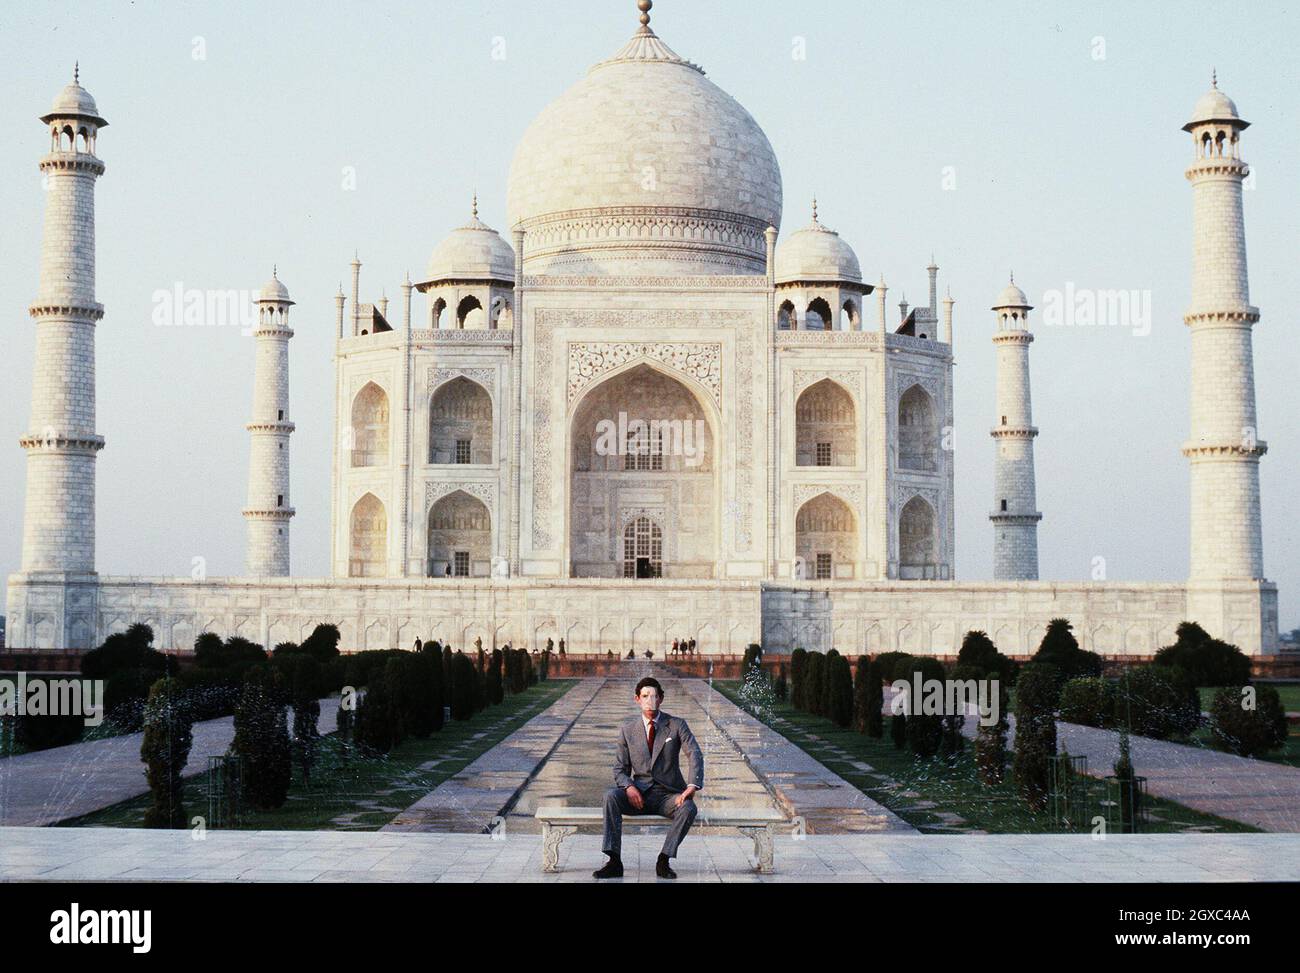 Prince Charles, Prince of Wales poses outside the Taj Mahal during his visit to India in 1980. Twelve years later the Princess of Wales posed alone in the same spot bringing attention to the loneliness of her marriage. Stock Photo